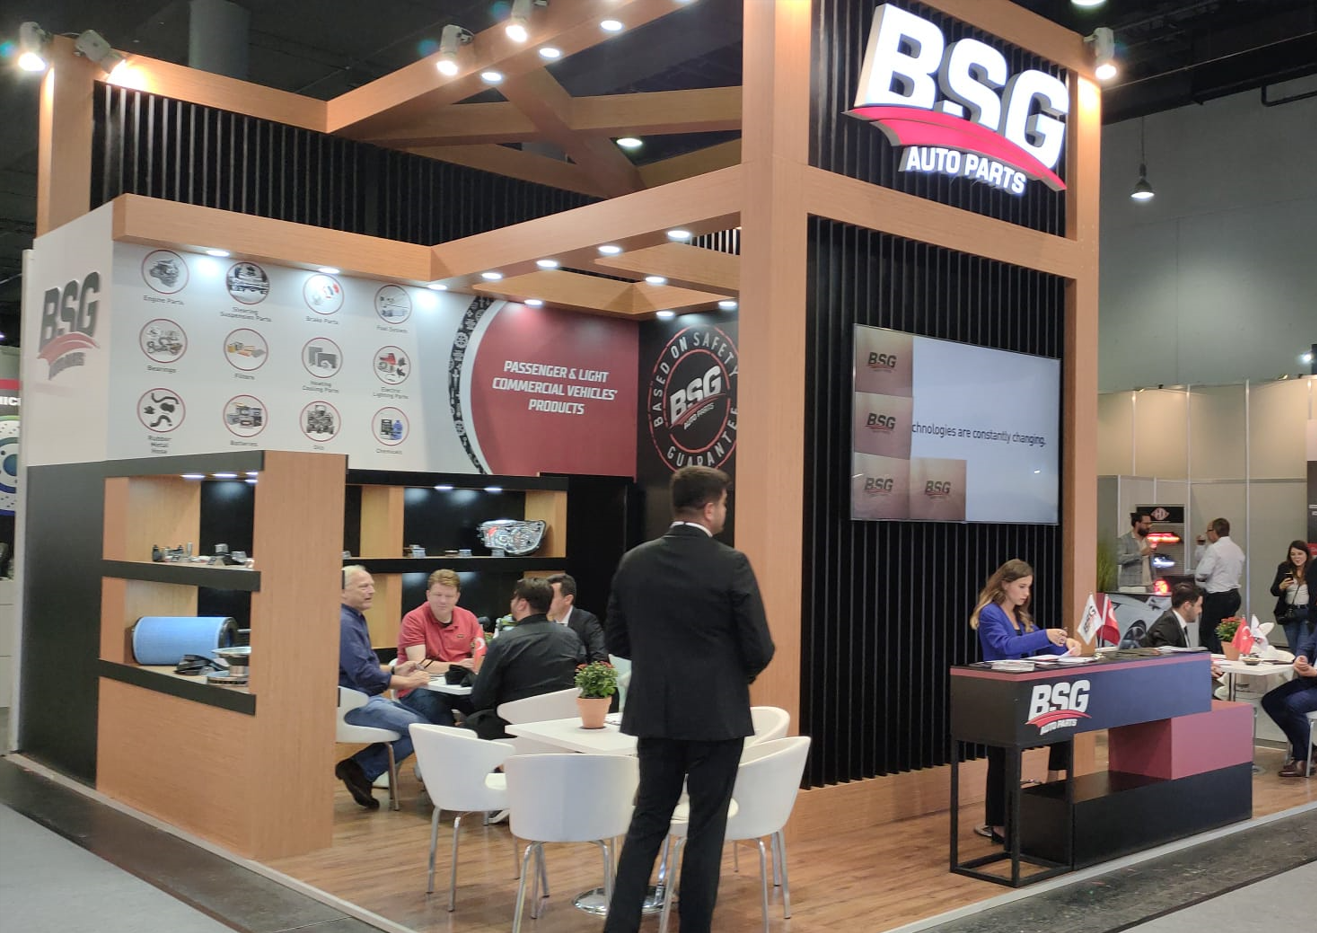 <p>Representing the entire value chain of the automotive aftermarket, Frankfurt Automechanika was held in Main between 13 - 17 September.</p>

<p>BSG Auto Parts took its place at the booth numbered G78 at the fair, where 78,000 visitors from 175 countries achieved a visitor satisfaction level of 92%.</p>

<p>BSG Auto Parts, which has come from the past to the present without compromising its sense of trust, and today delivers services to 94 countries, continues its quarter-century journey with the promise of 'Full Guarantee and Trust' to its customers. BSG Auto Parts, which hosted large groups of guests and developed cooperation with its new visitors during the fair, is preparing to host its guests at Frankfurt Automechanika in 2024.</p>